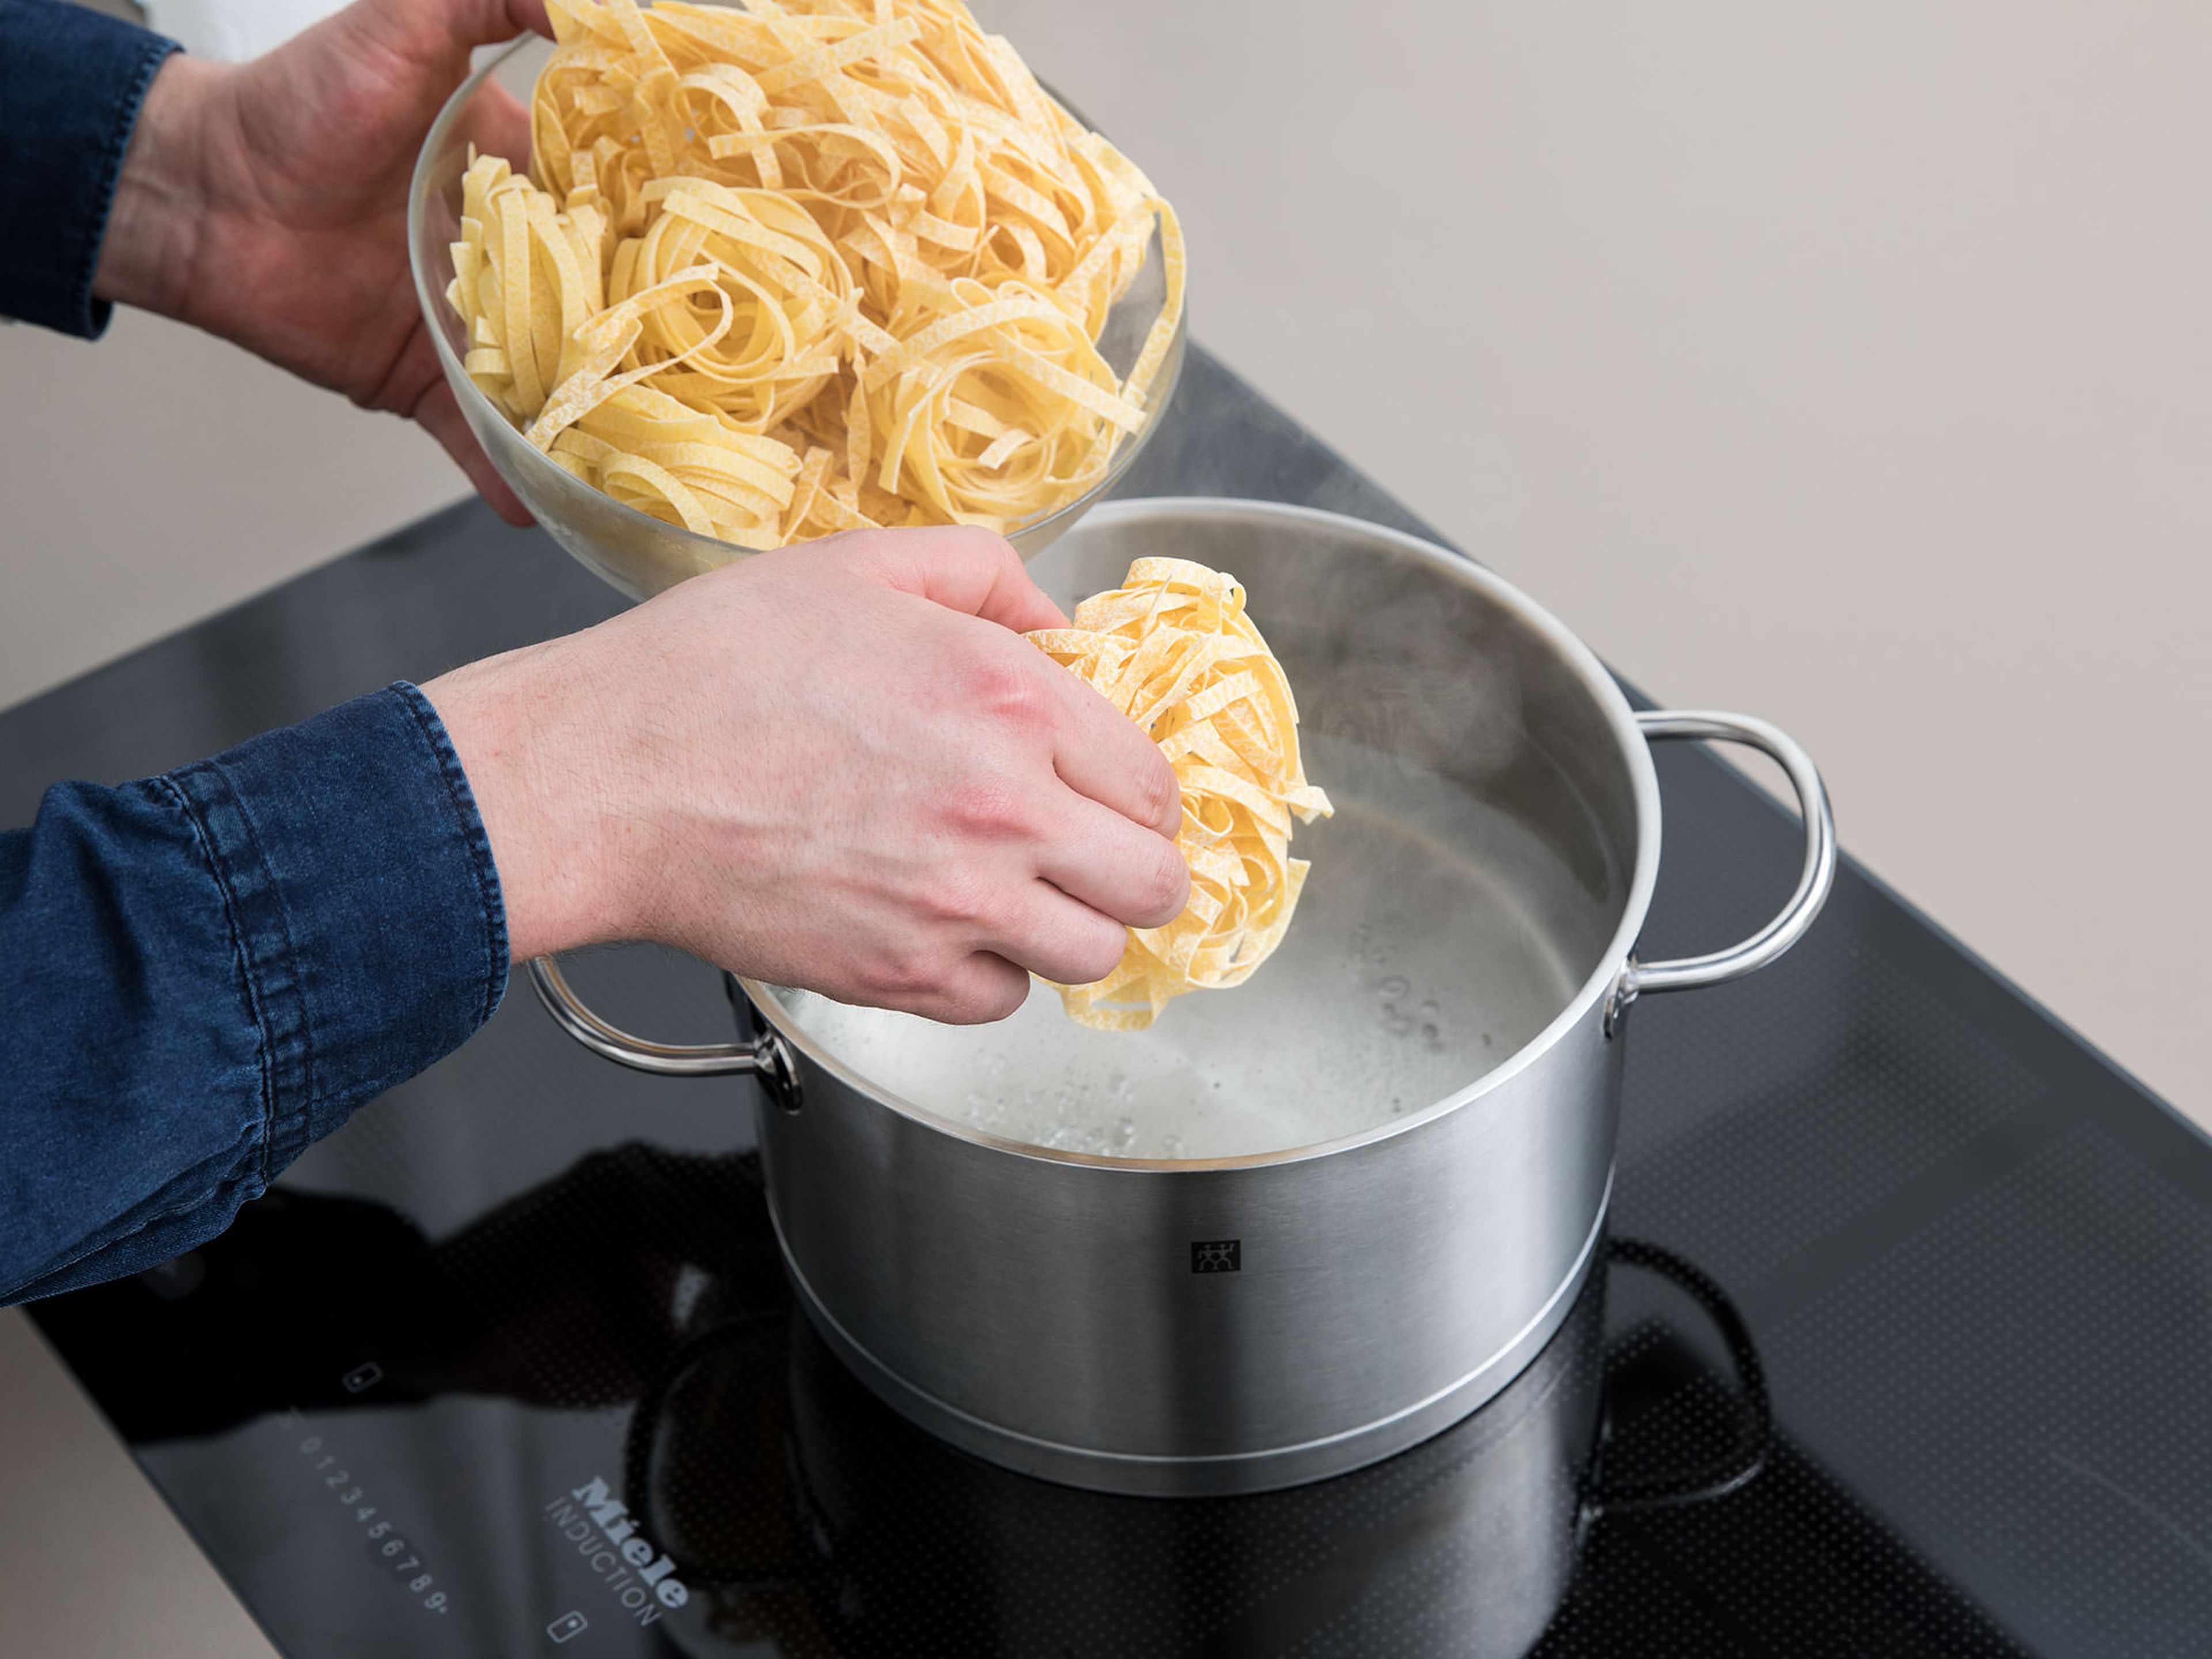 Bring water to a boil in a pot and salt generously. Cook tagliatelle according to package instructions or until al dente. Drain.